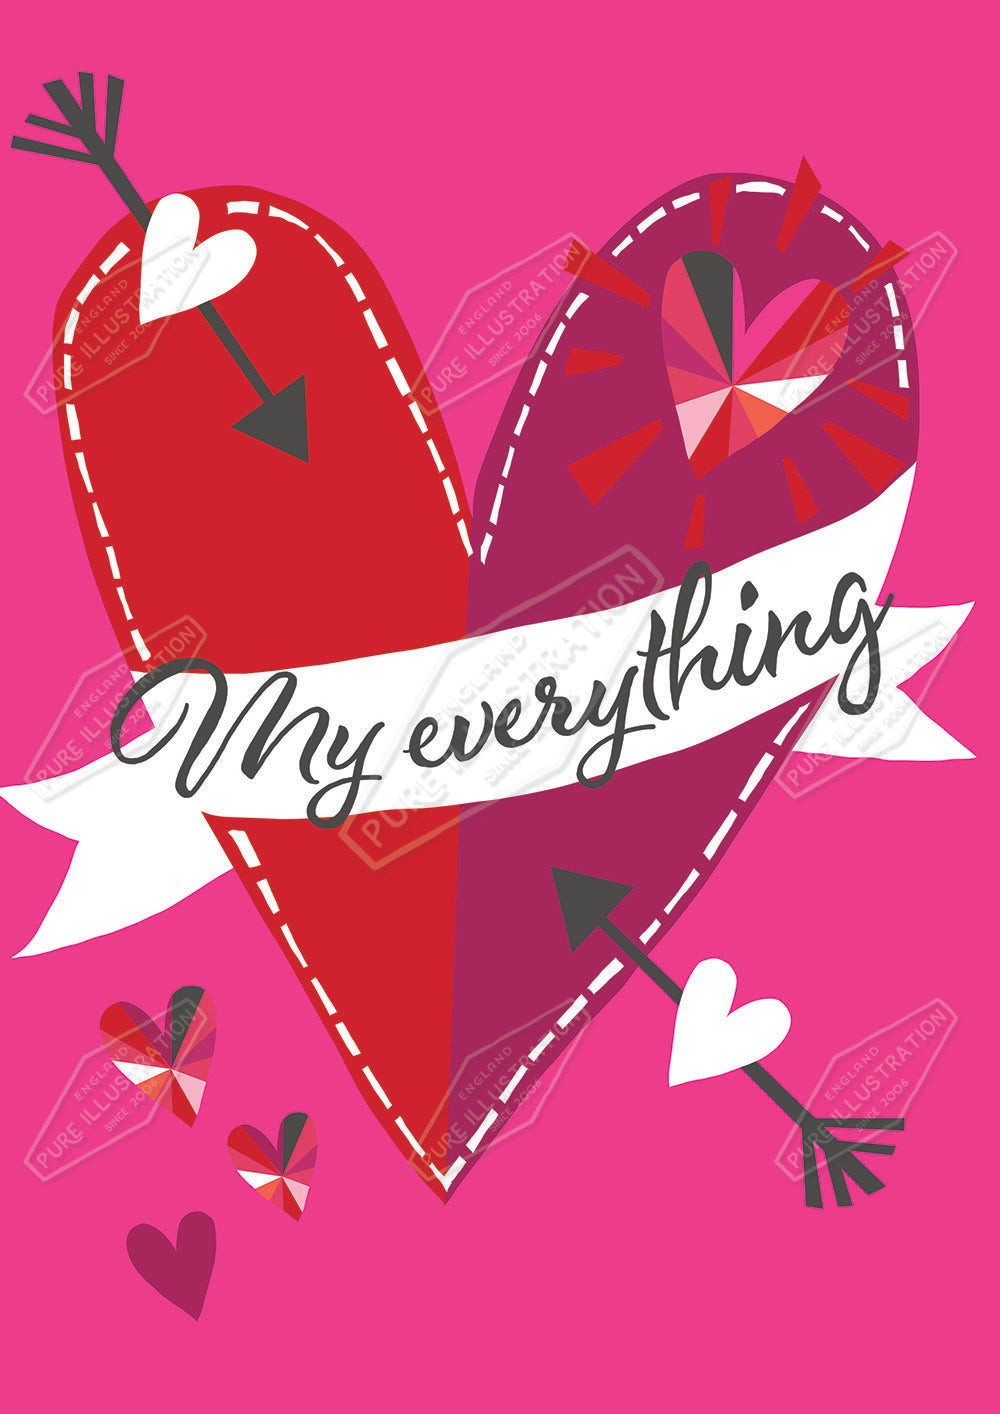 00030147KSP- Kerry Spurling is represented by Pure Art Licensing Agency - Valentine's Greeting Card Design